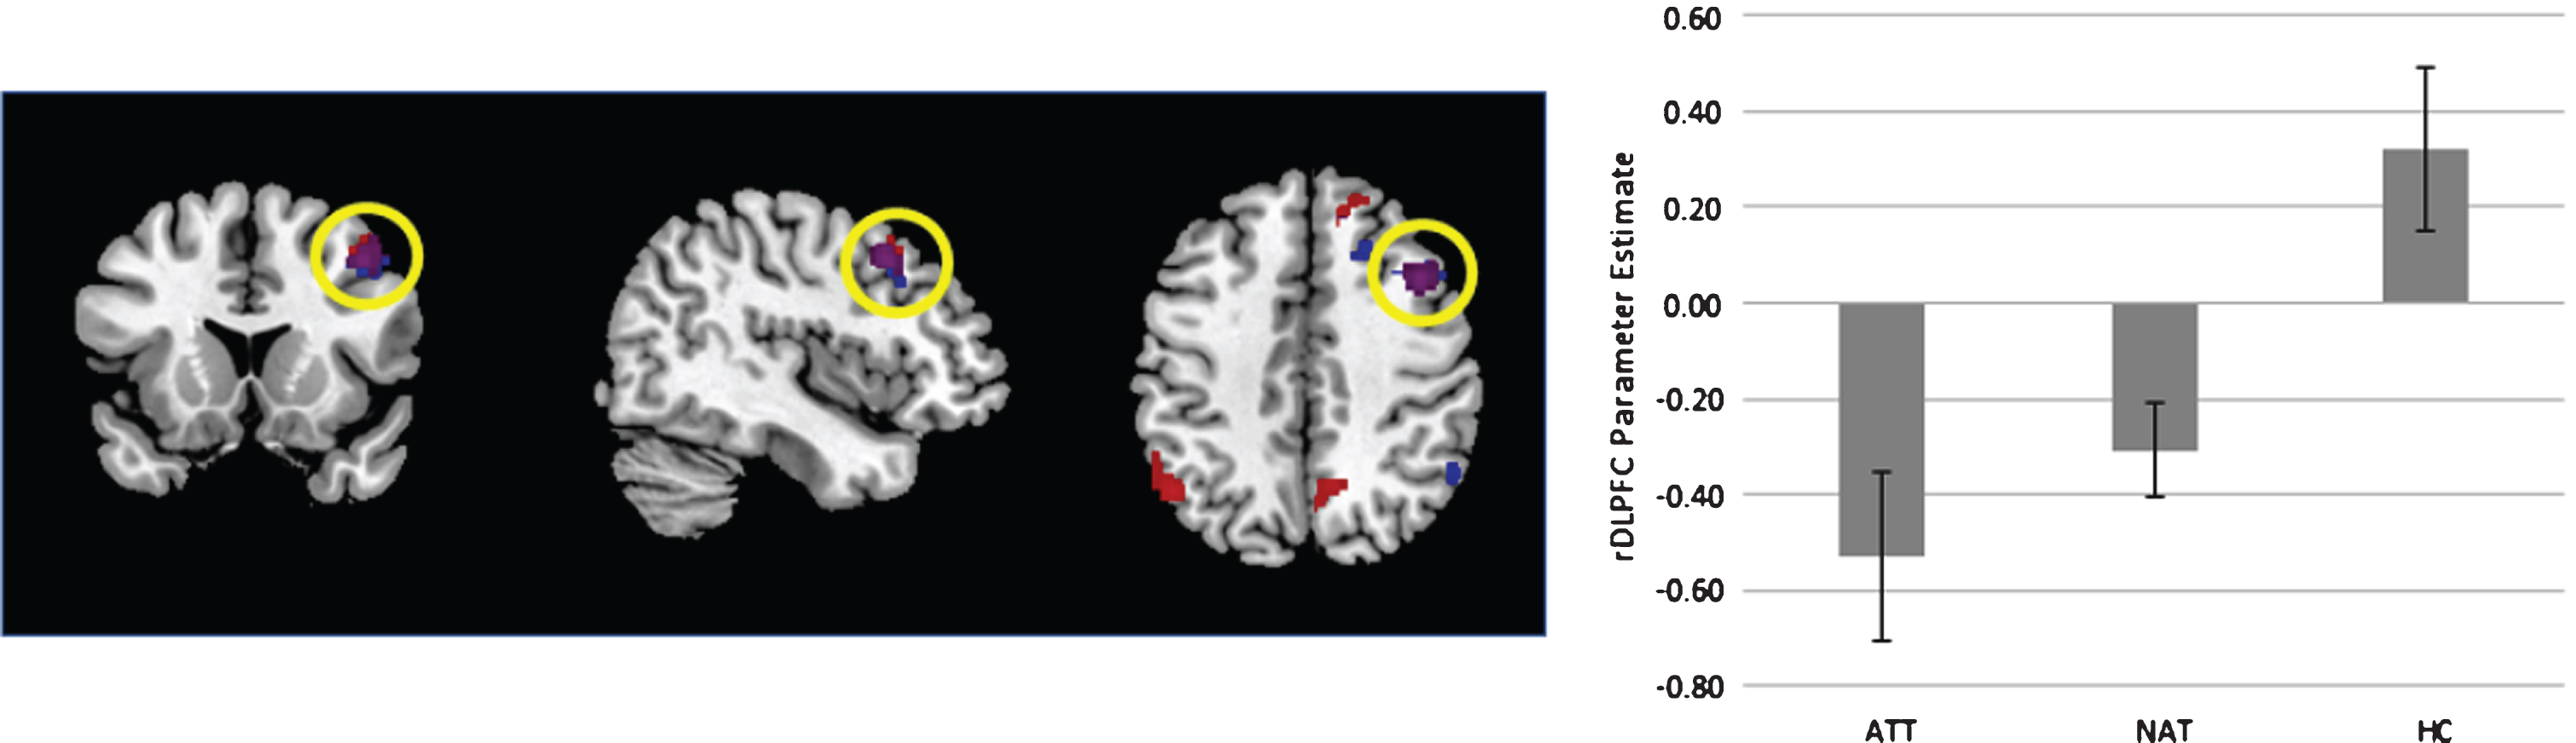 Left - Display of the contrast of ATT vs controls (blue) and both patient groups vs controls (red). Overlap is signified in purple. Contrast thresholded at p < 0.001 uncorrected for display purposes. Right – extracted parameter estimates from the right dorsolateral prefrontal cortex (rDLPFC), plotted for each group. Error bars reflect standard error of the mean.